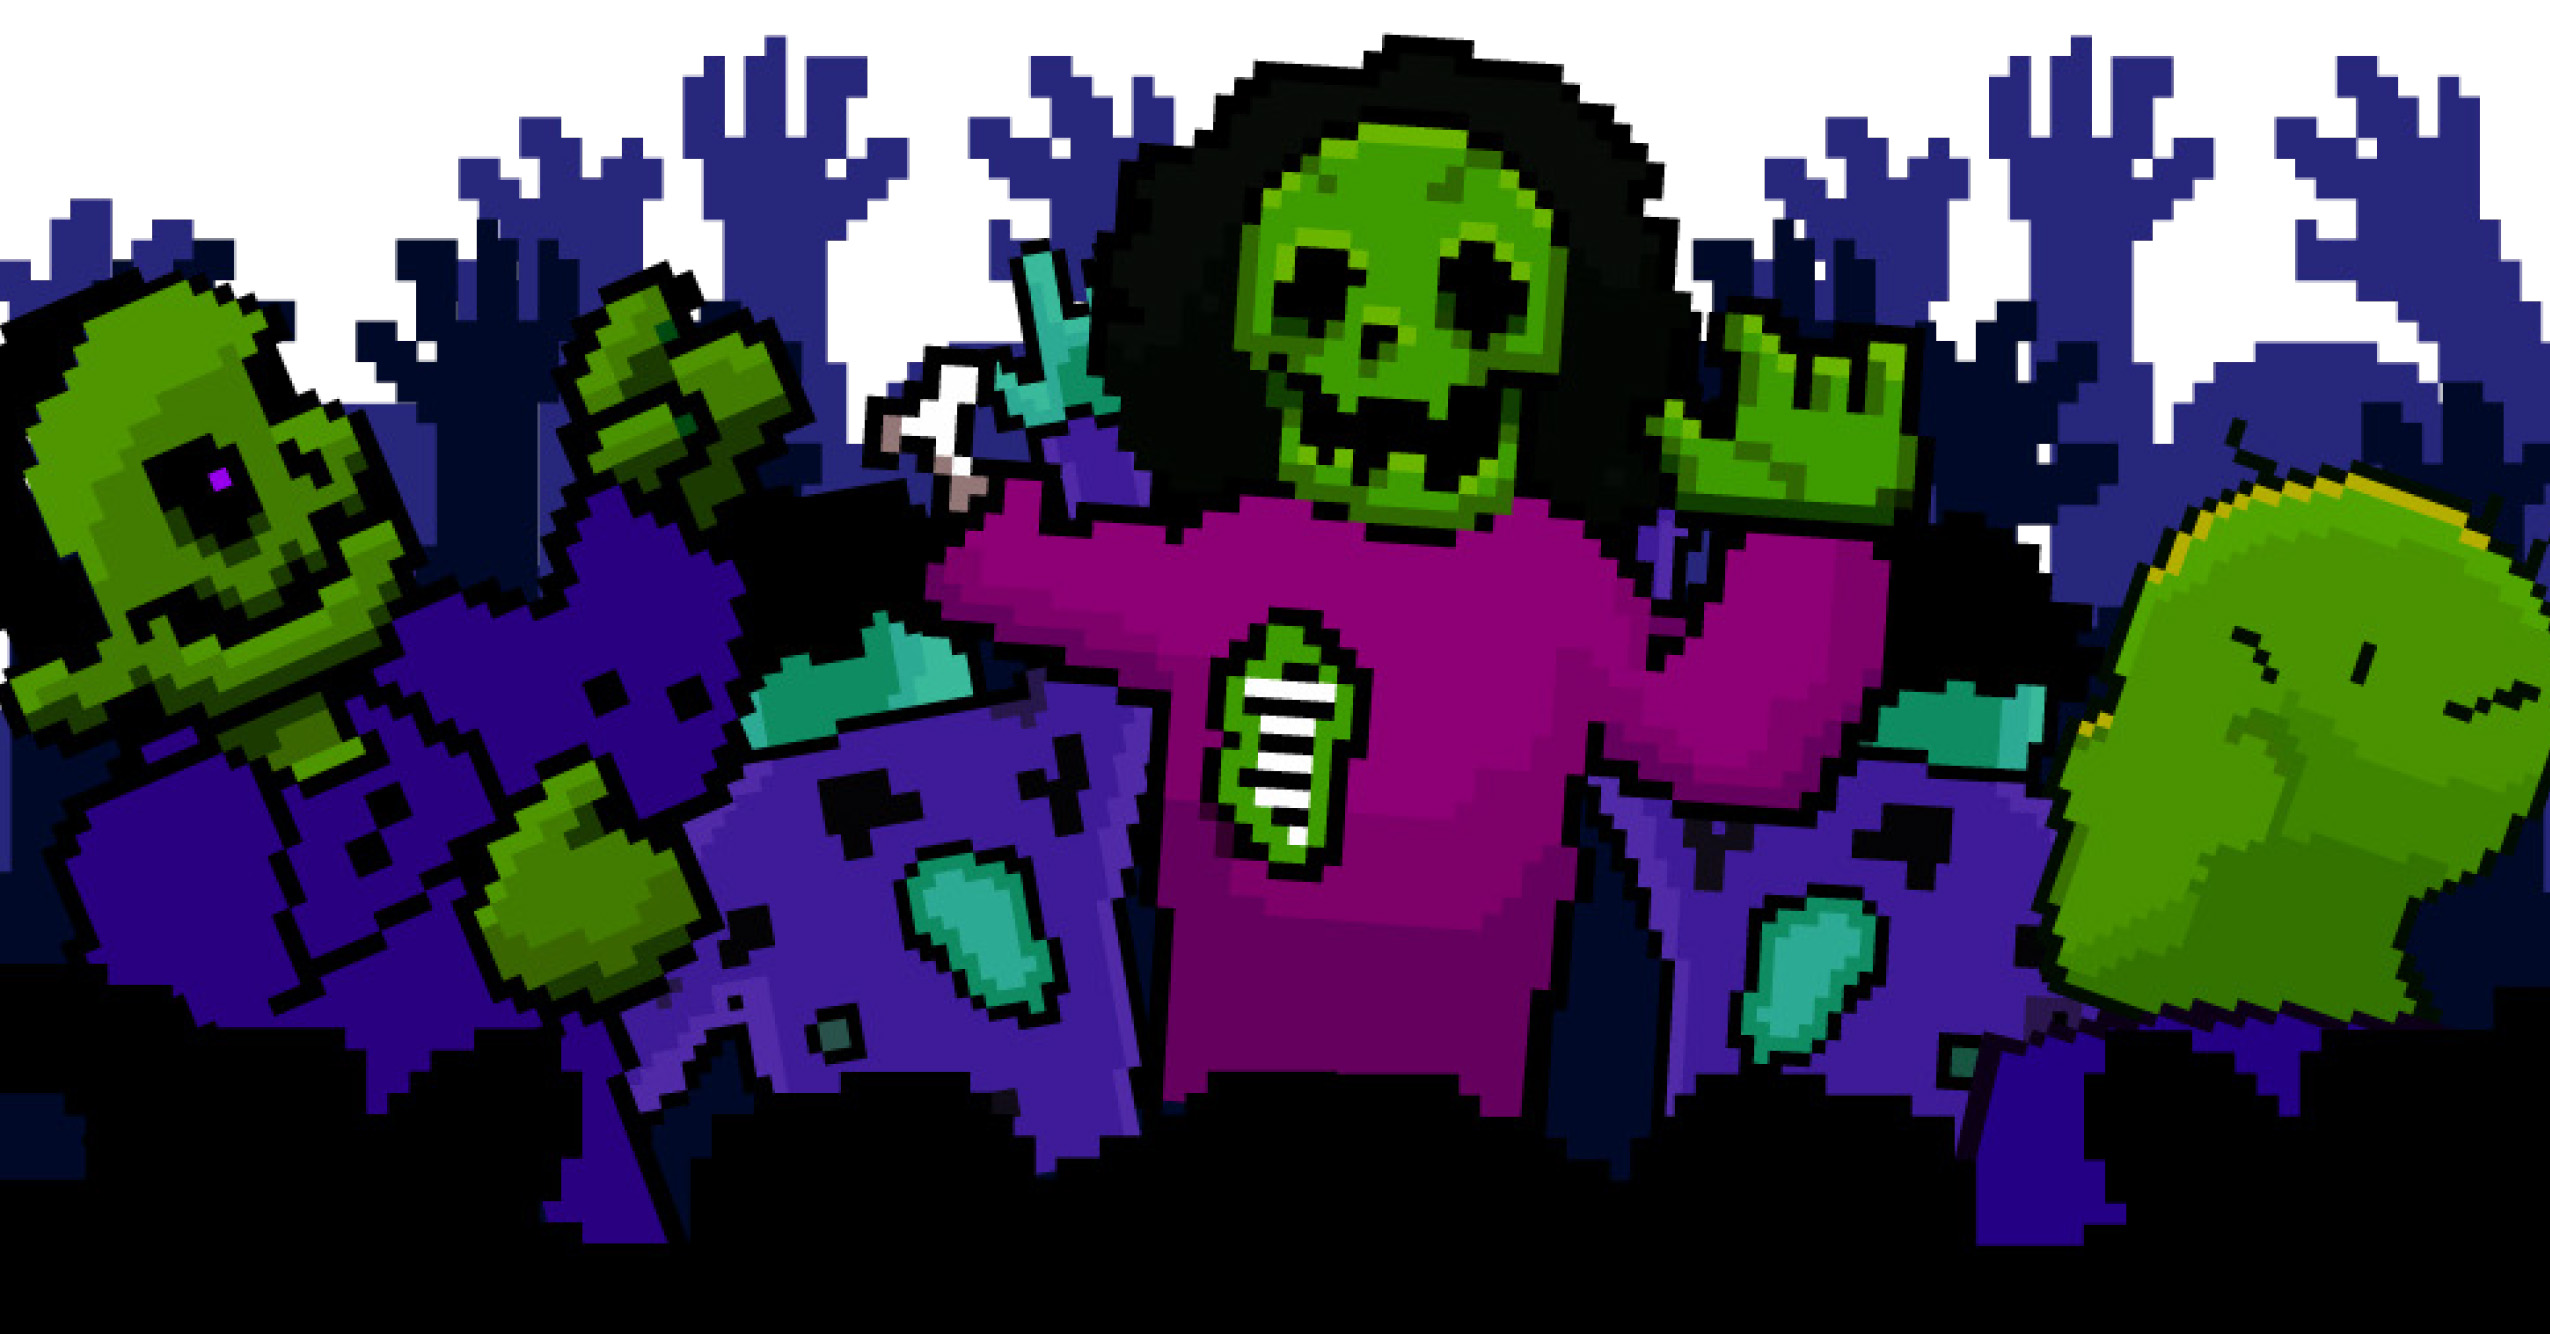 Green zombies in purple clothes partying like they have no brains and need more brains. The center zombie needs more shirt and skin to cover their ribcage.